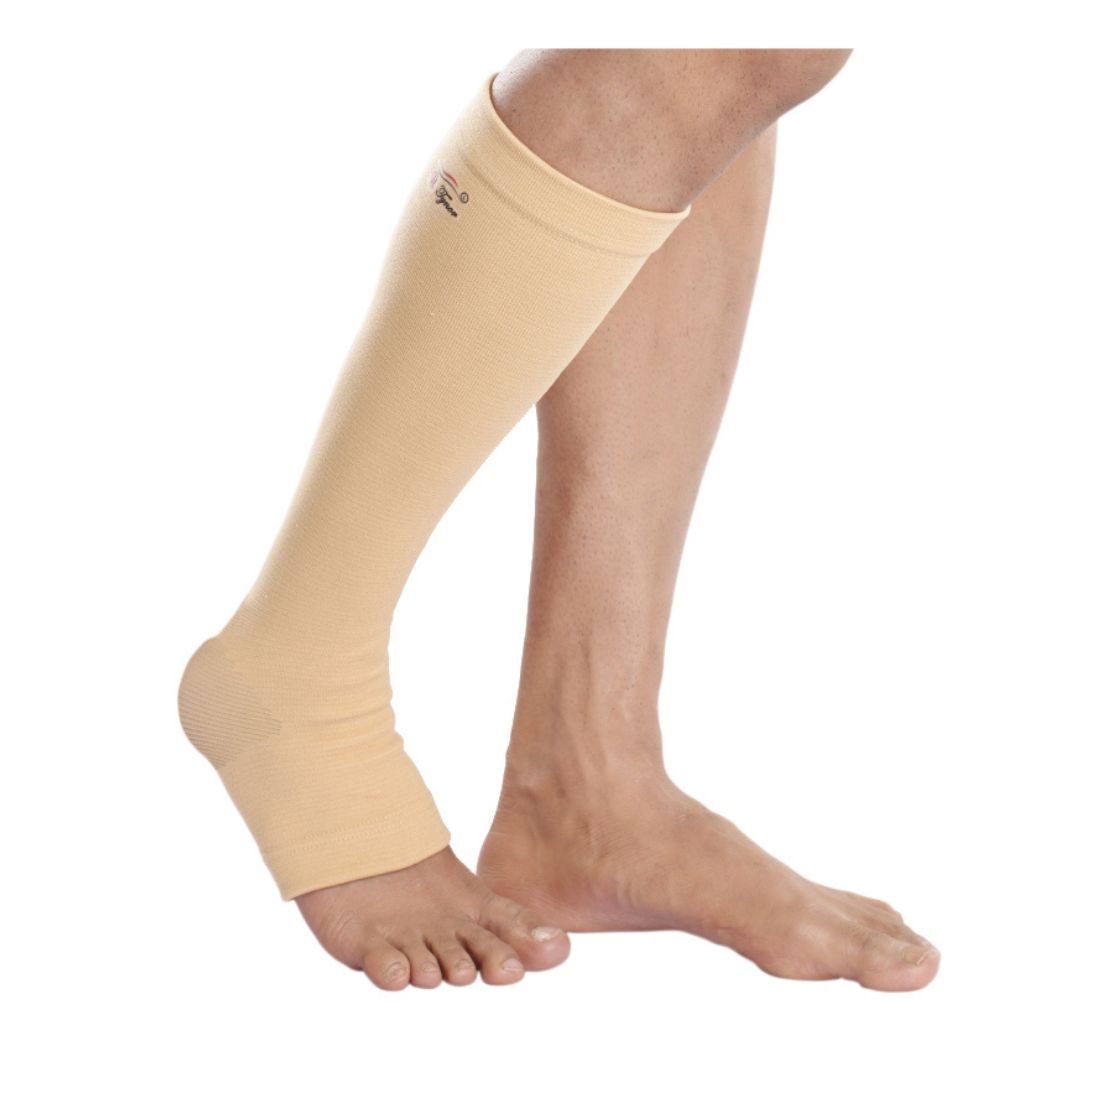 Buy Compression stockings are specially designed to apply pressure to your lower legs, helping to maintain blood flow and reduce discomfort and swelling.   